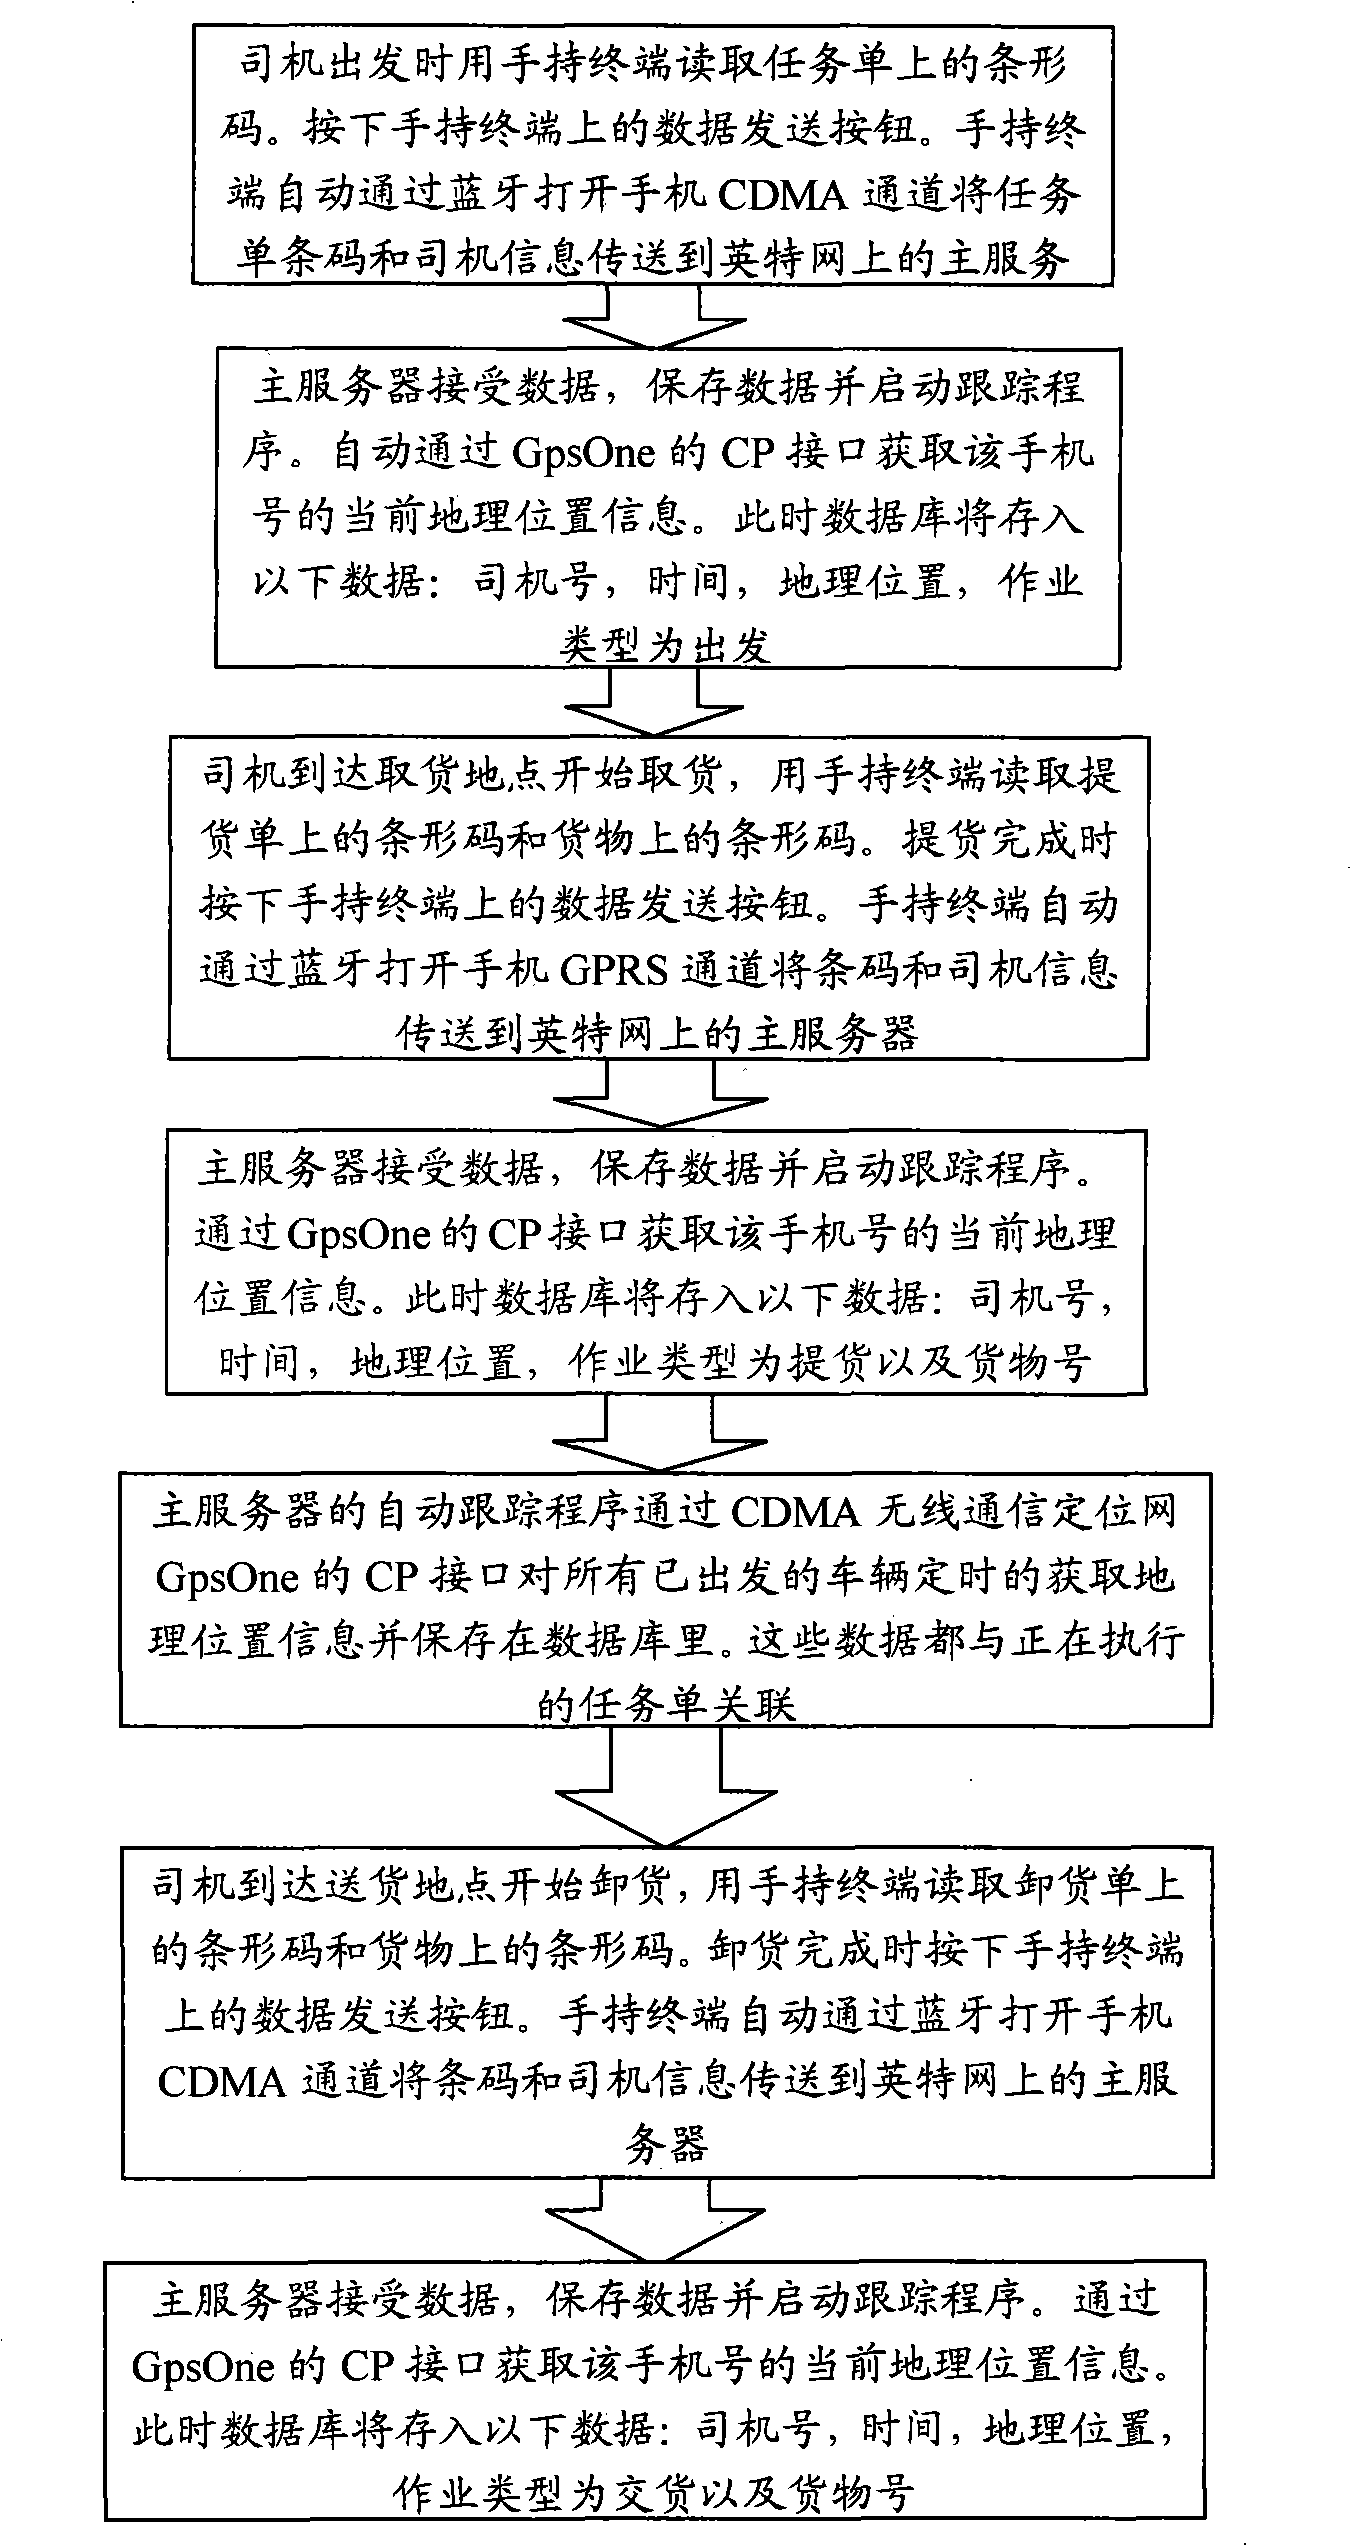 Method for implementing real-time cargo tracing and monitoring based on logistics management platform